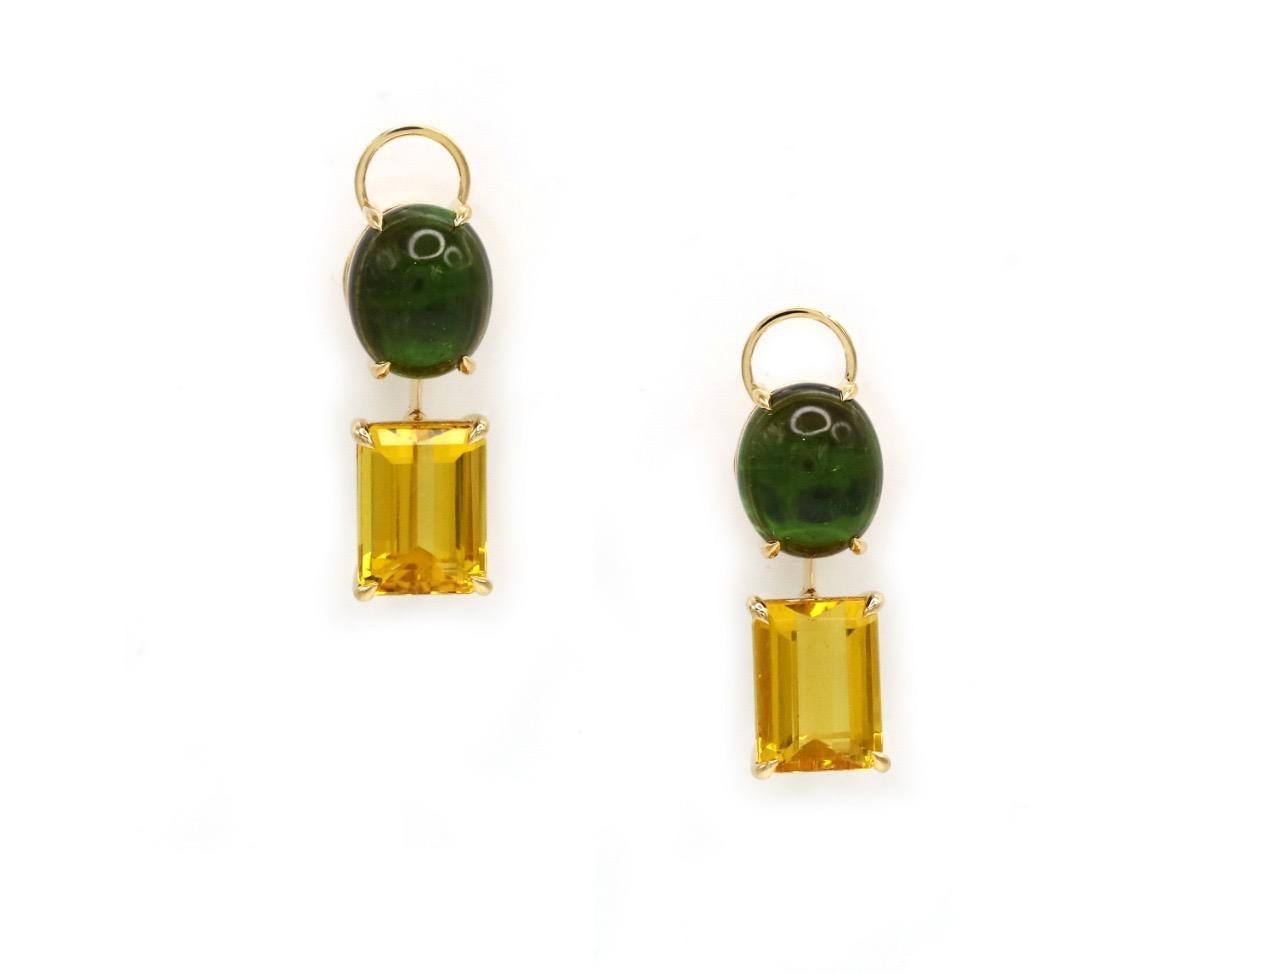 EARRINGS

Green Tourmaline -2 -9.61 Cts

Yellow Beryl - 2 - 11.43 Cts

18K Yellow Gold

Weight 7.24 GMS



Indulge in elegance with our exquisite floral collection earrings. Crafted with precision, these captivating dangle earrings boast 5.85 carats